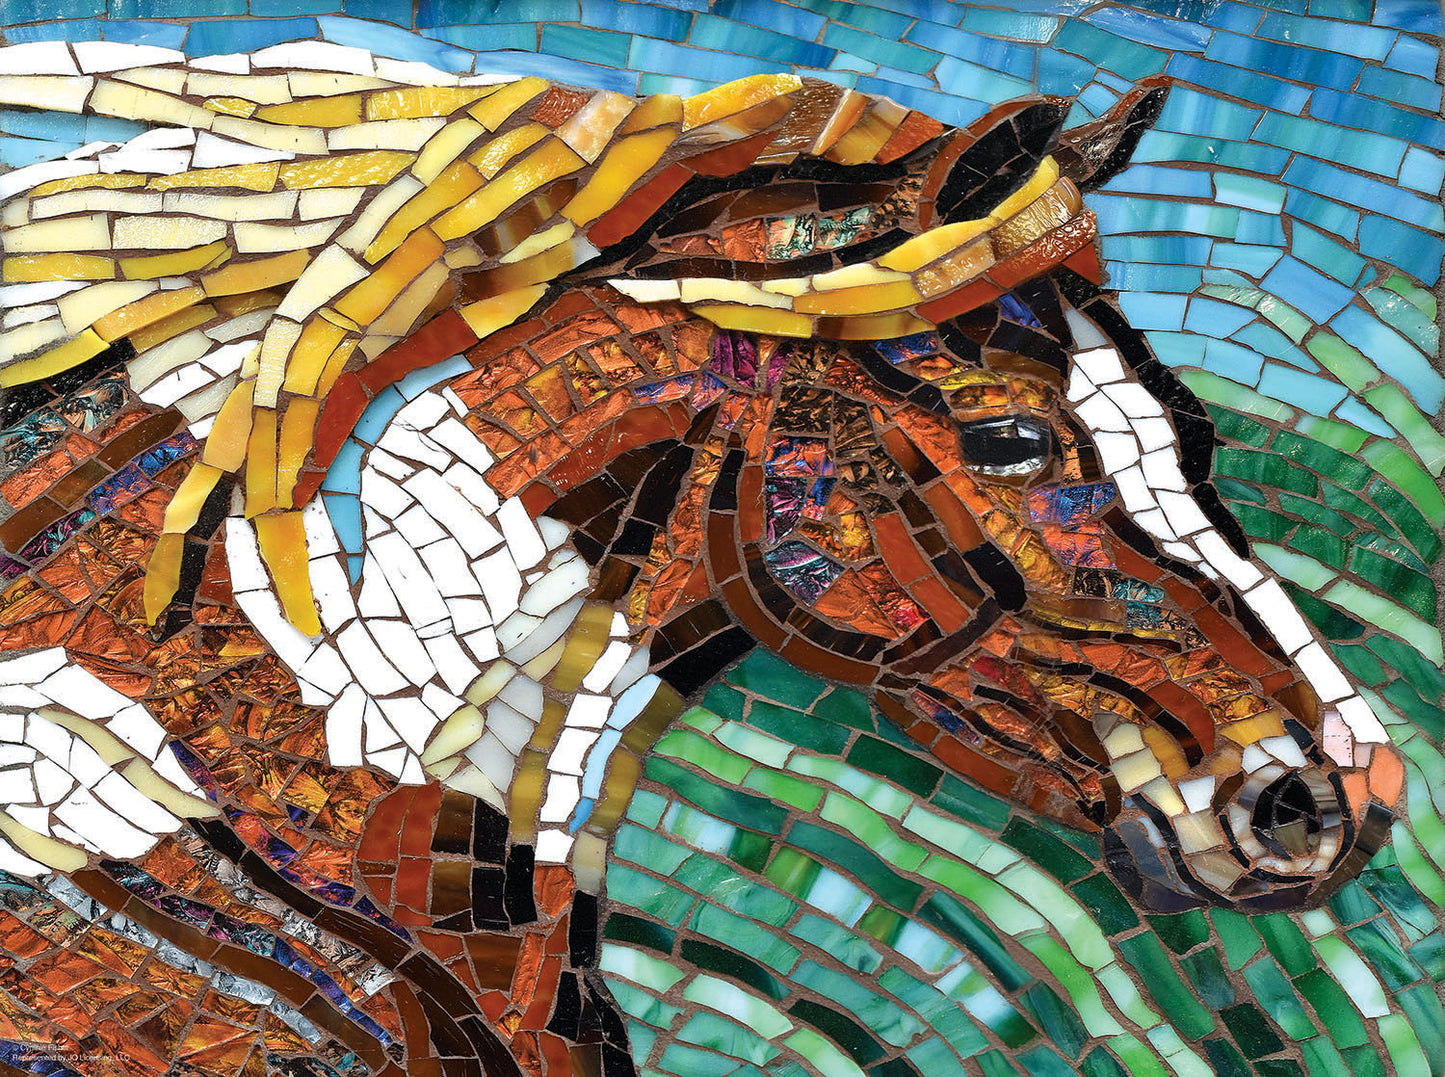 Stained Glass Horse - 1000 Piece Jigsaw Puzzle